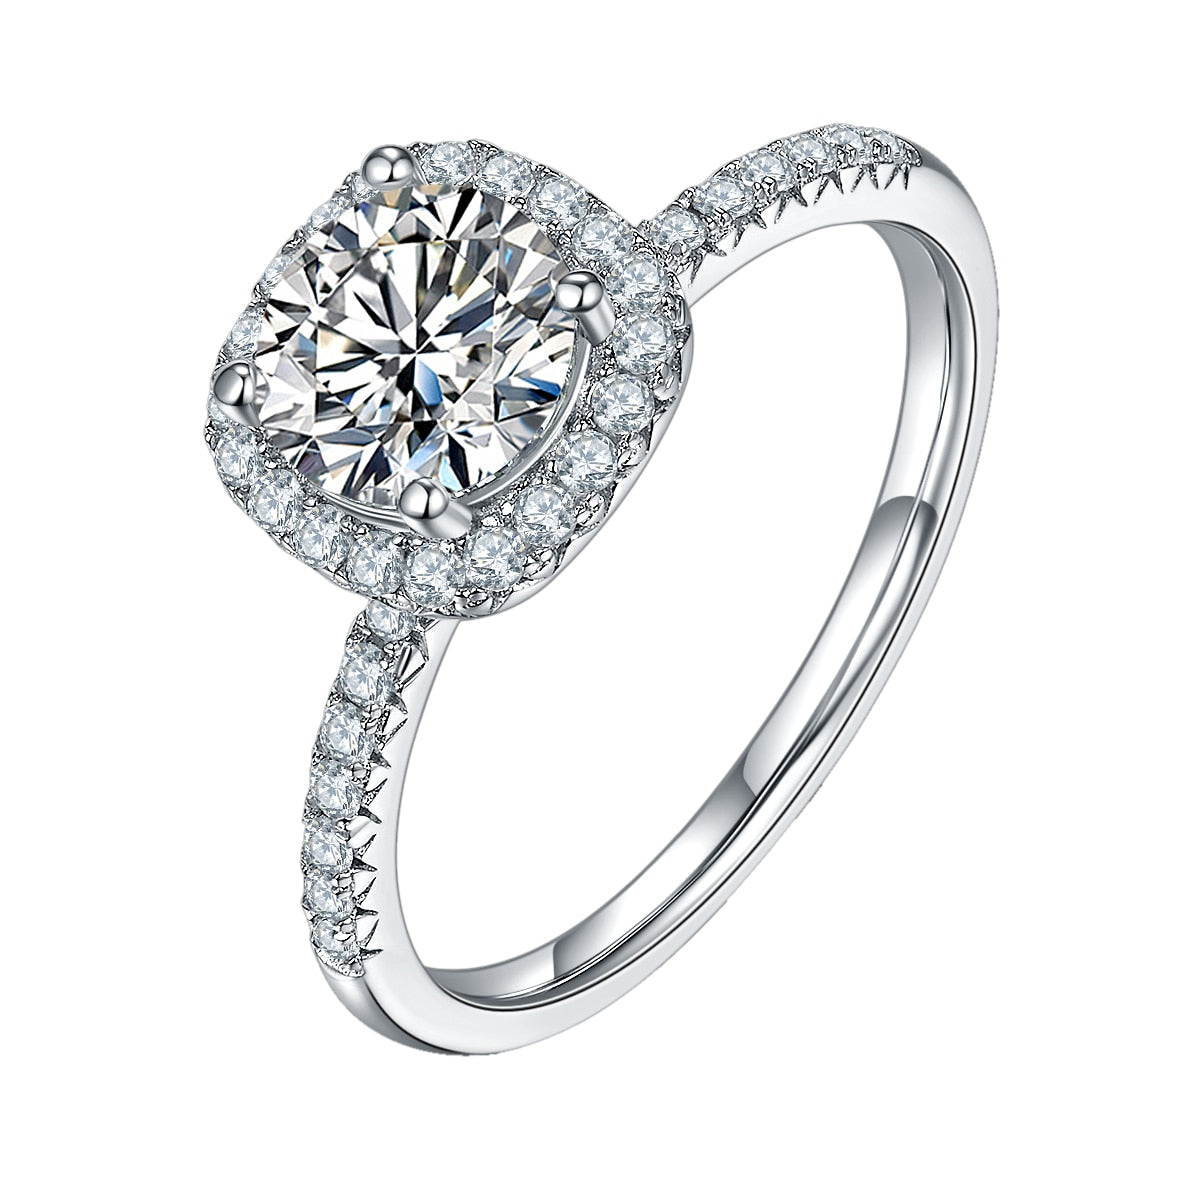 A silver squared halo engagement ring with pave band.